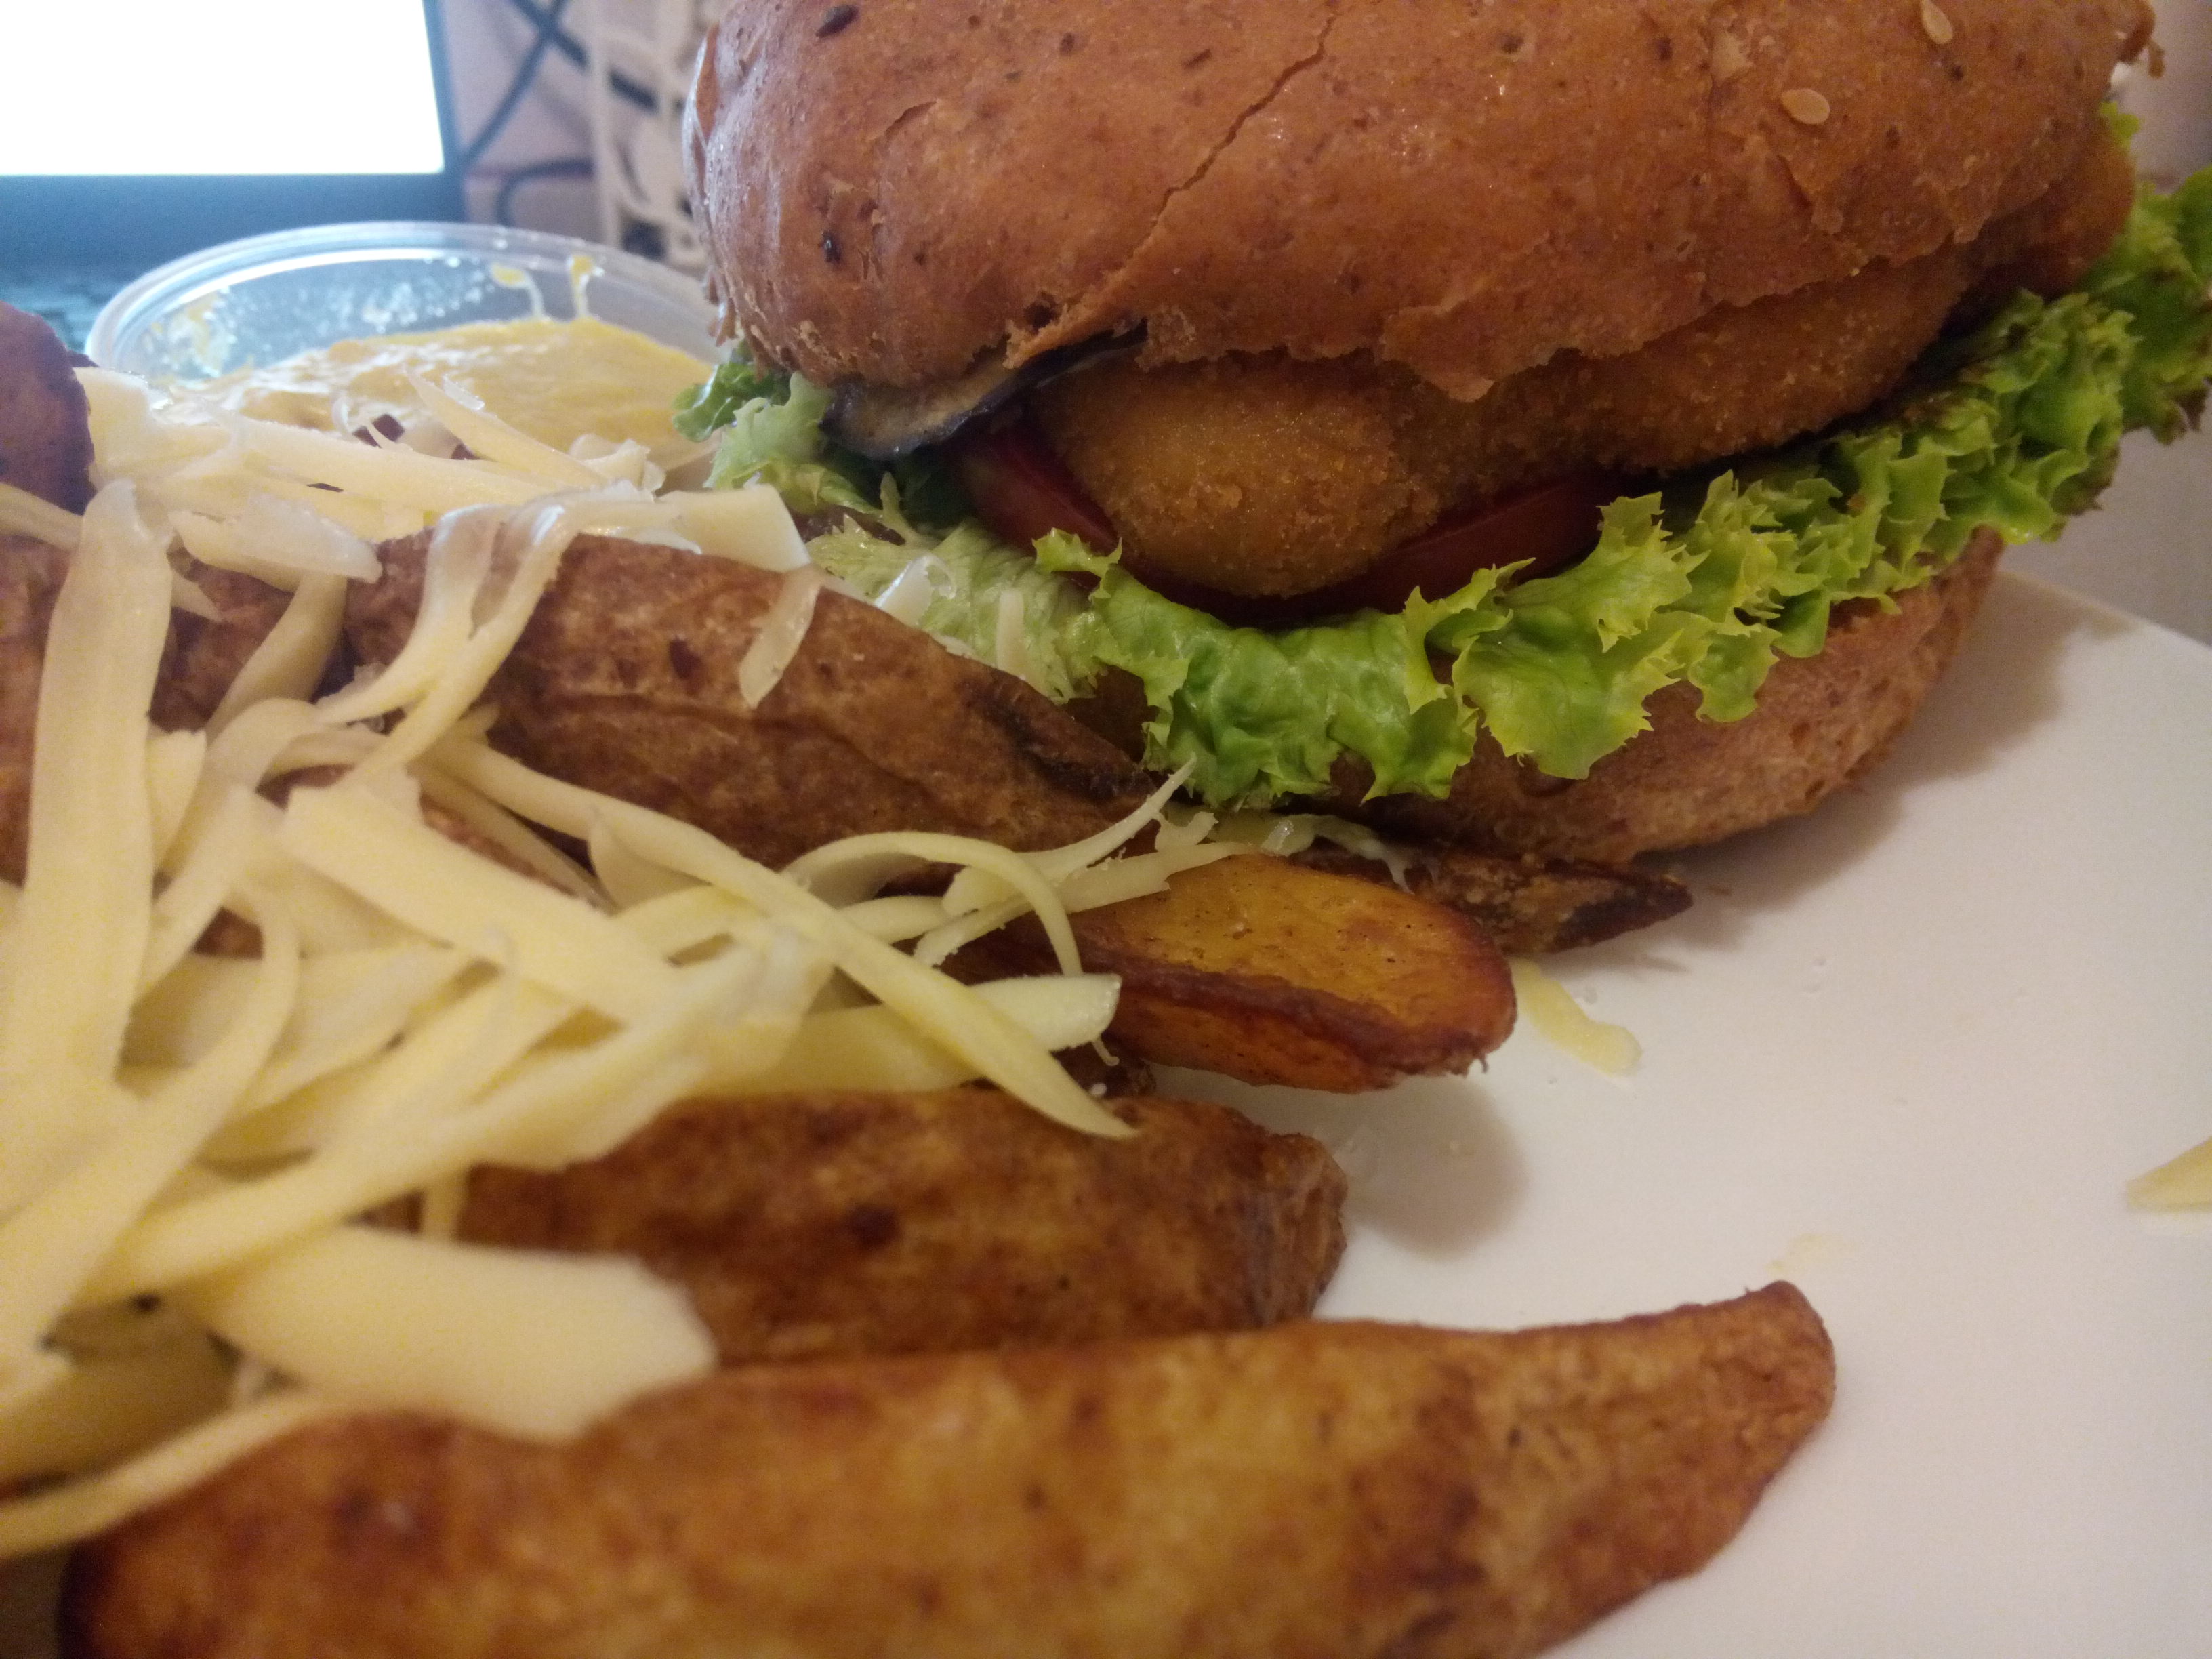 A close up on a pile of potato wedges covered with grated cheese, beside a burger pun out of which pokes frilly lettuce, tomato, and a breaded patty